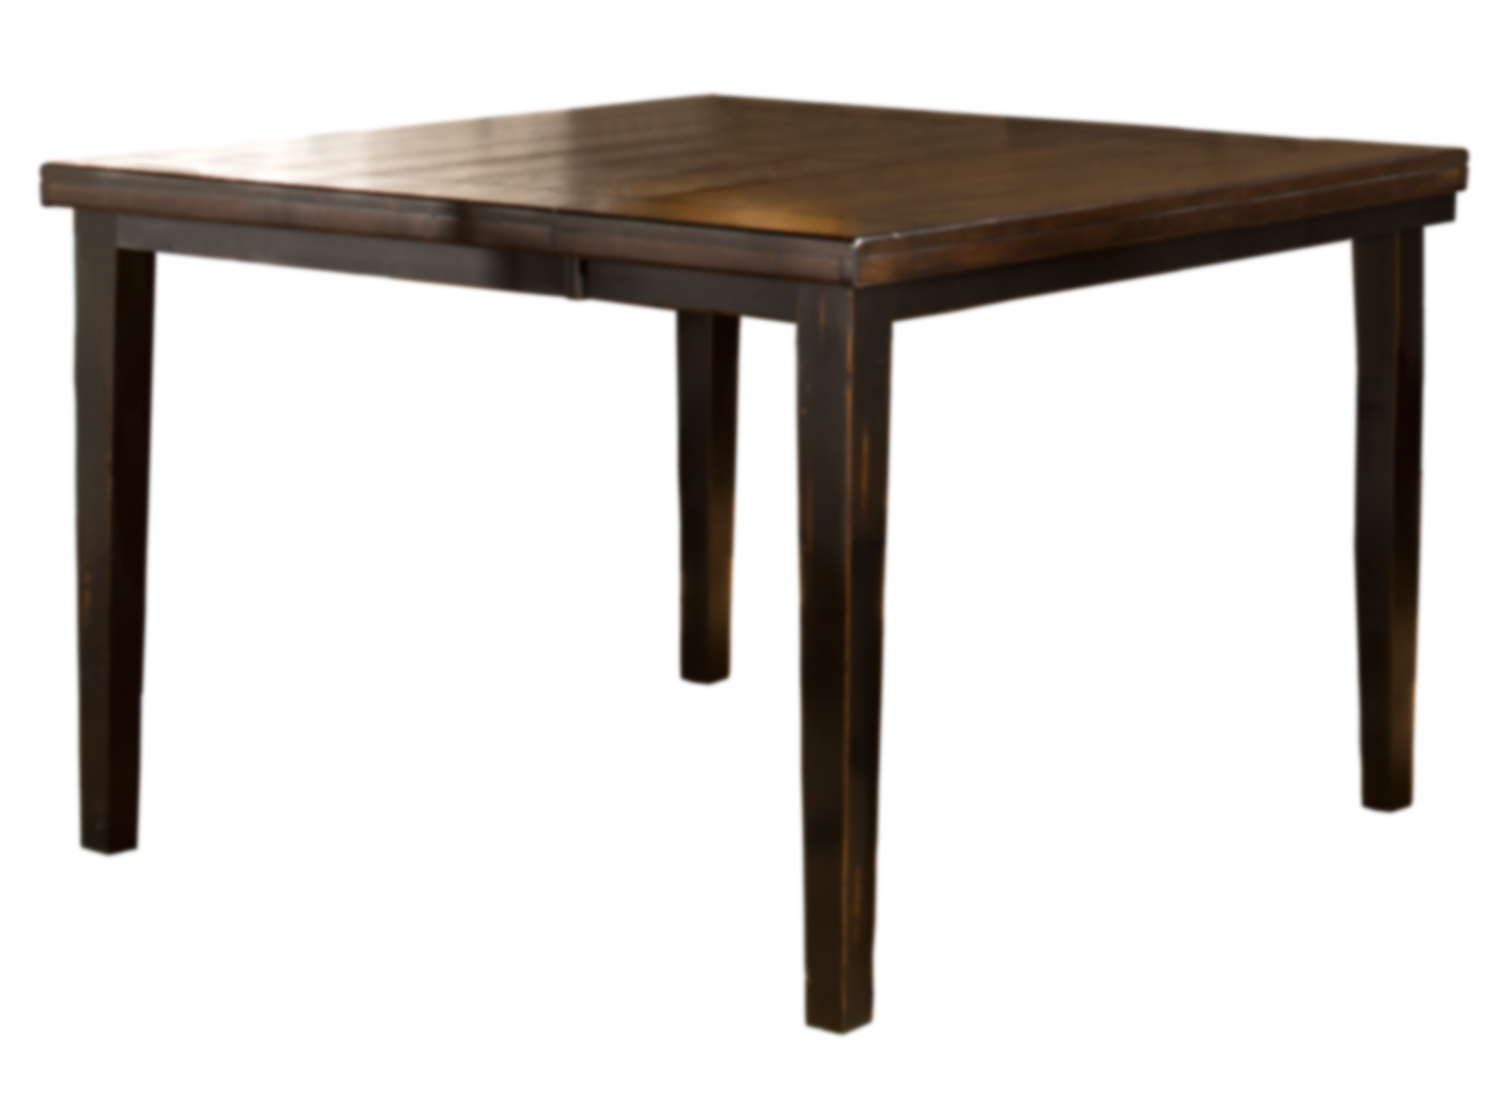 Hillsdale Killarney Counter Height Table - Black/ Antique Brown